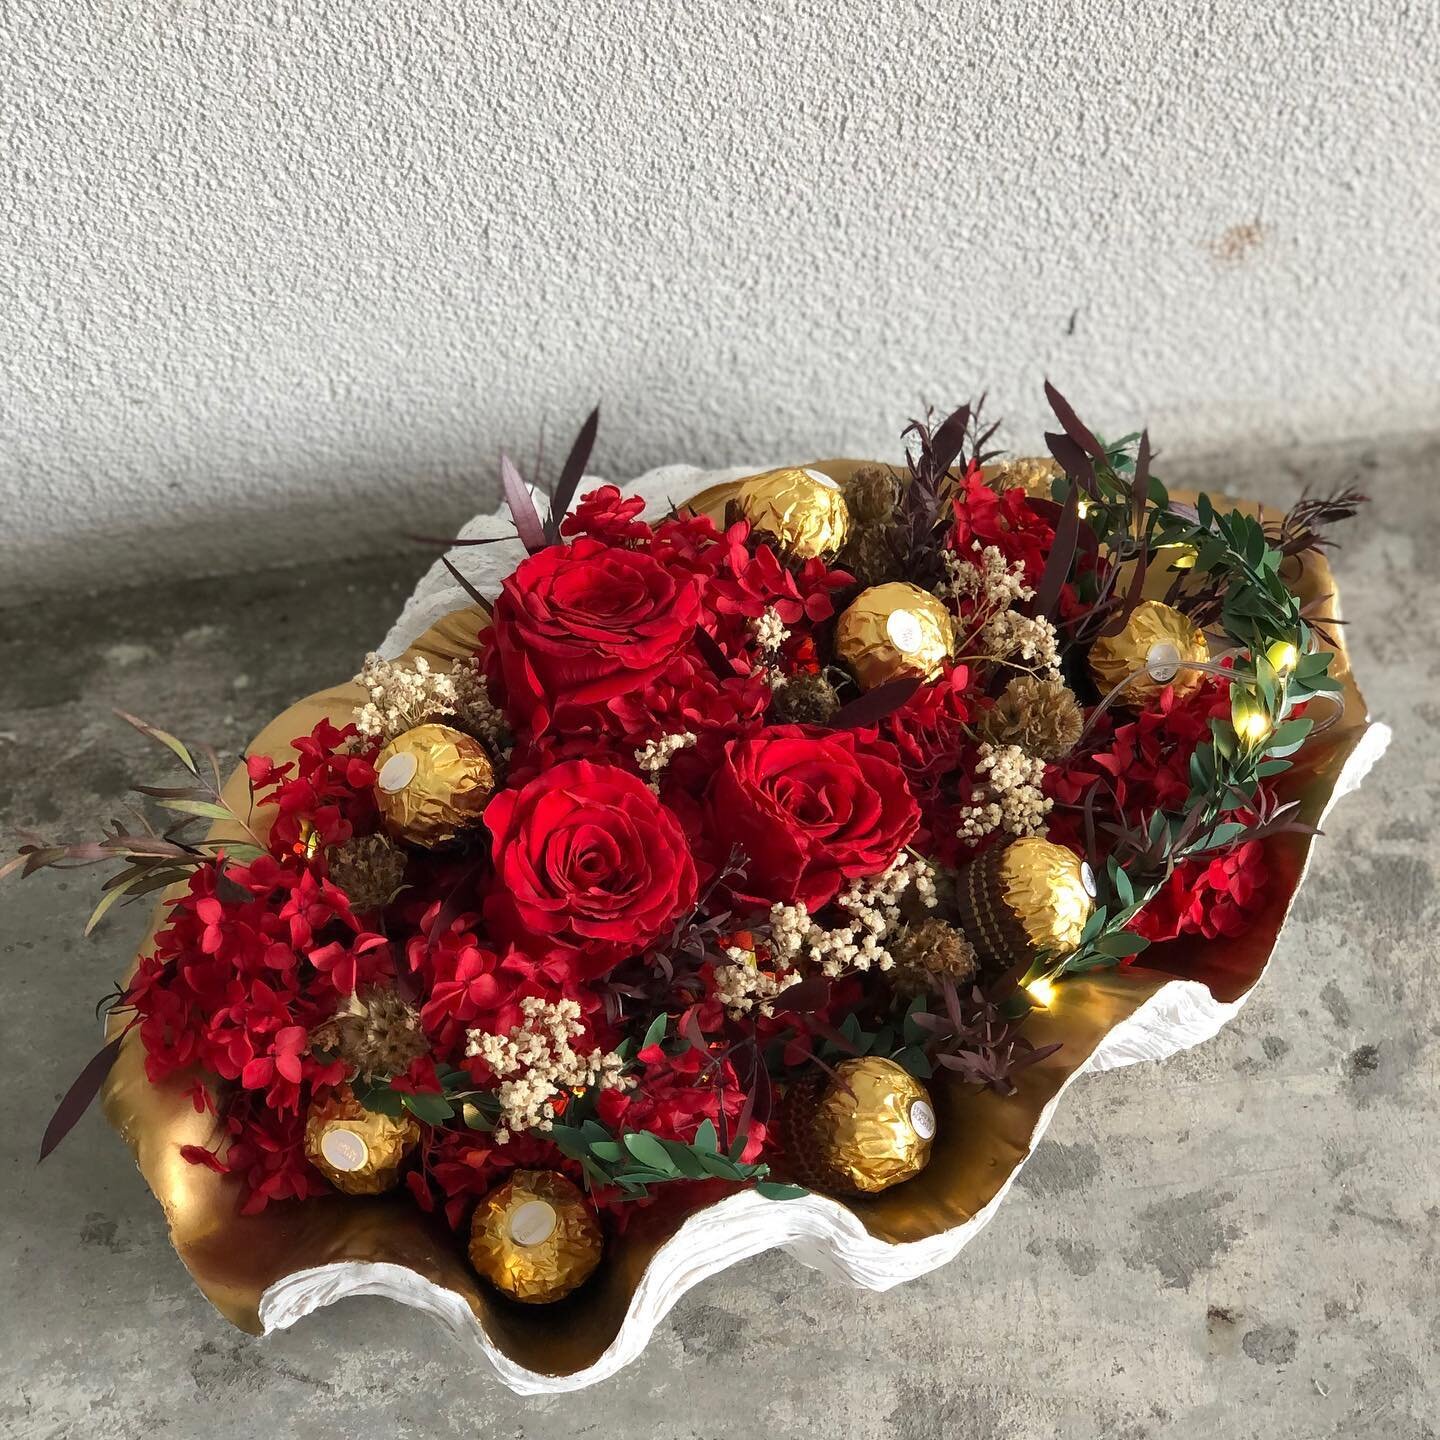 Our little seashells are flying out the door! Order yours now! 
-
-
-
-
-
-
#flowerstagram  #flowersofinstagram #flowers #preservedflowers #preservedflowerarrangement #flowersoftheday #sydneyflorist